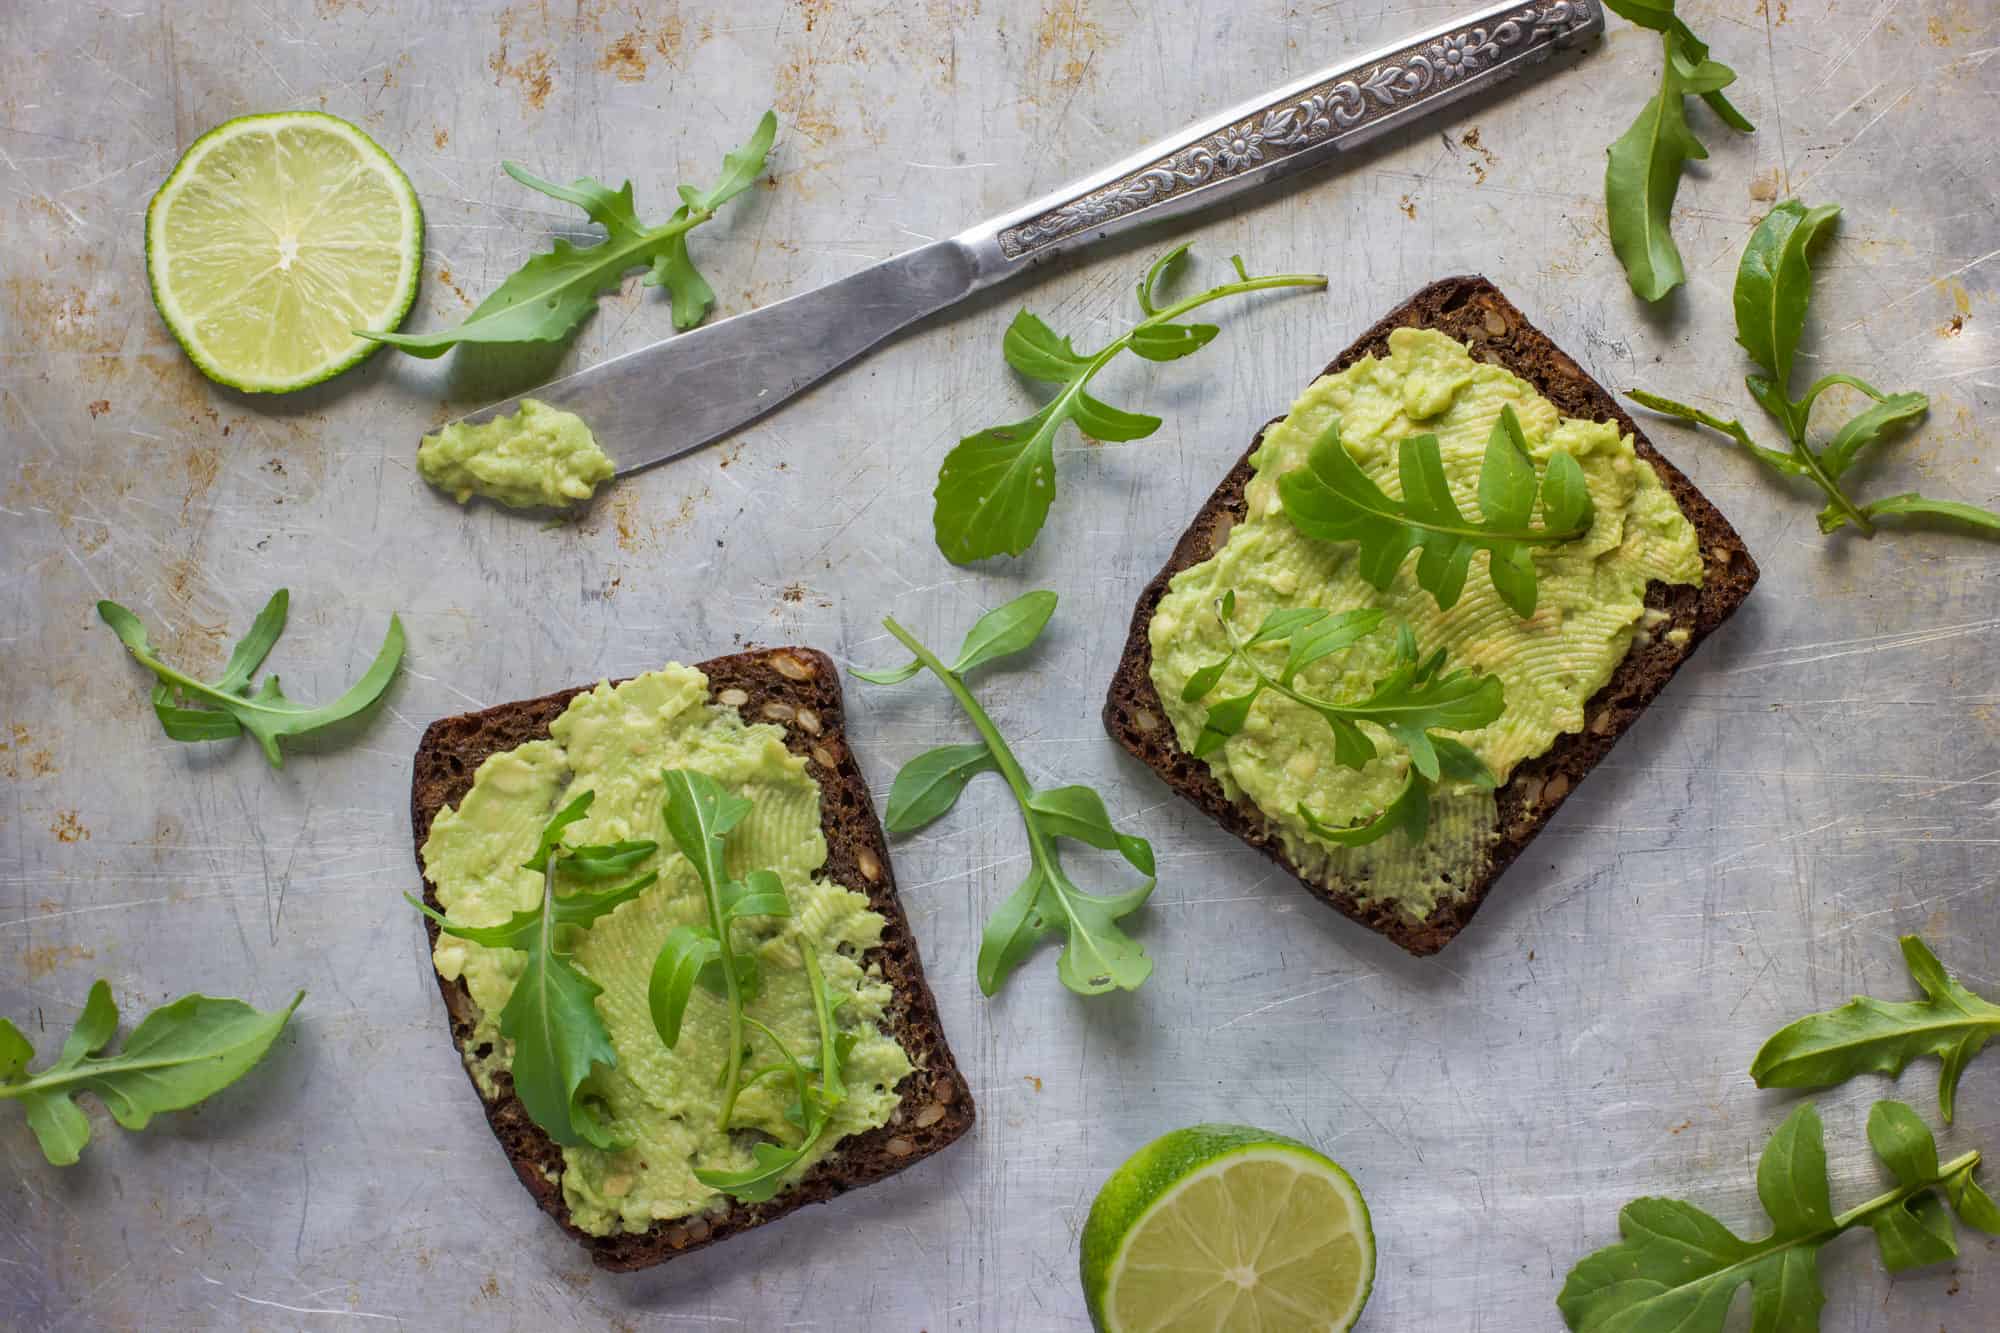 Two slices of avocado toast garnished with lime and fresh herbs on a rustic metal surface.